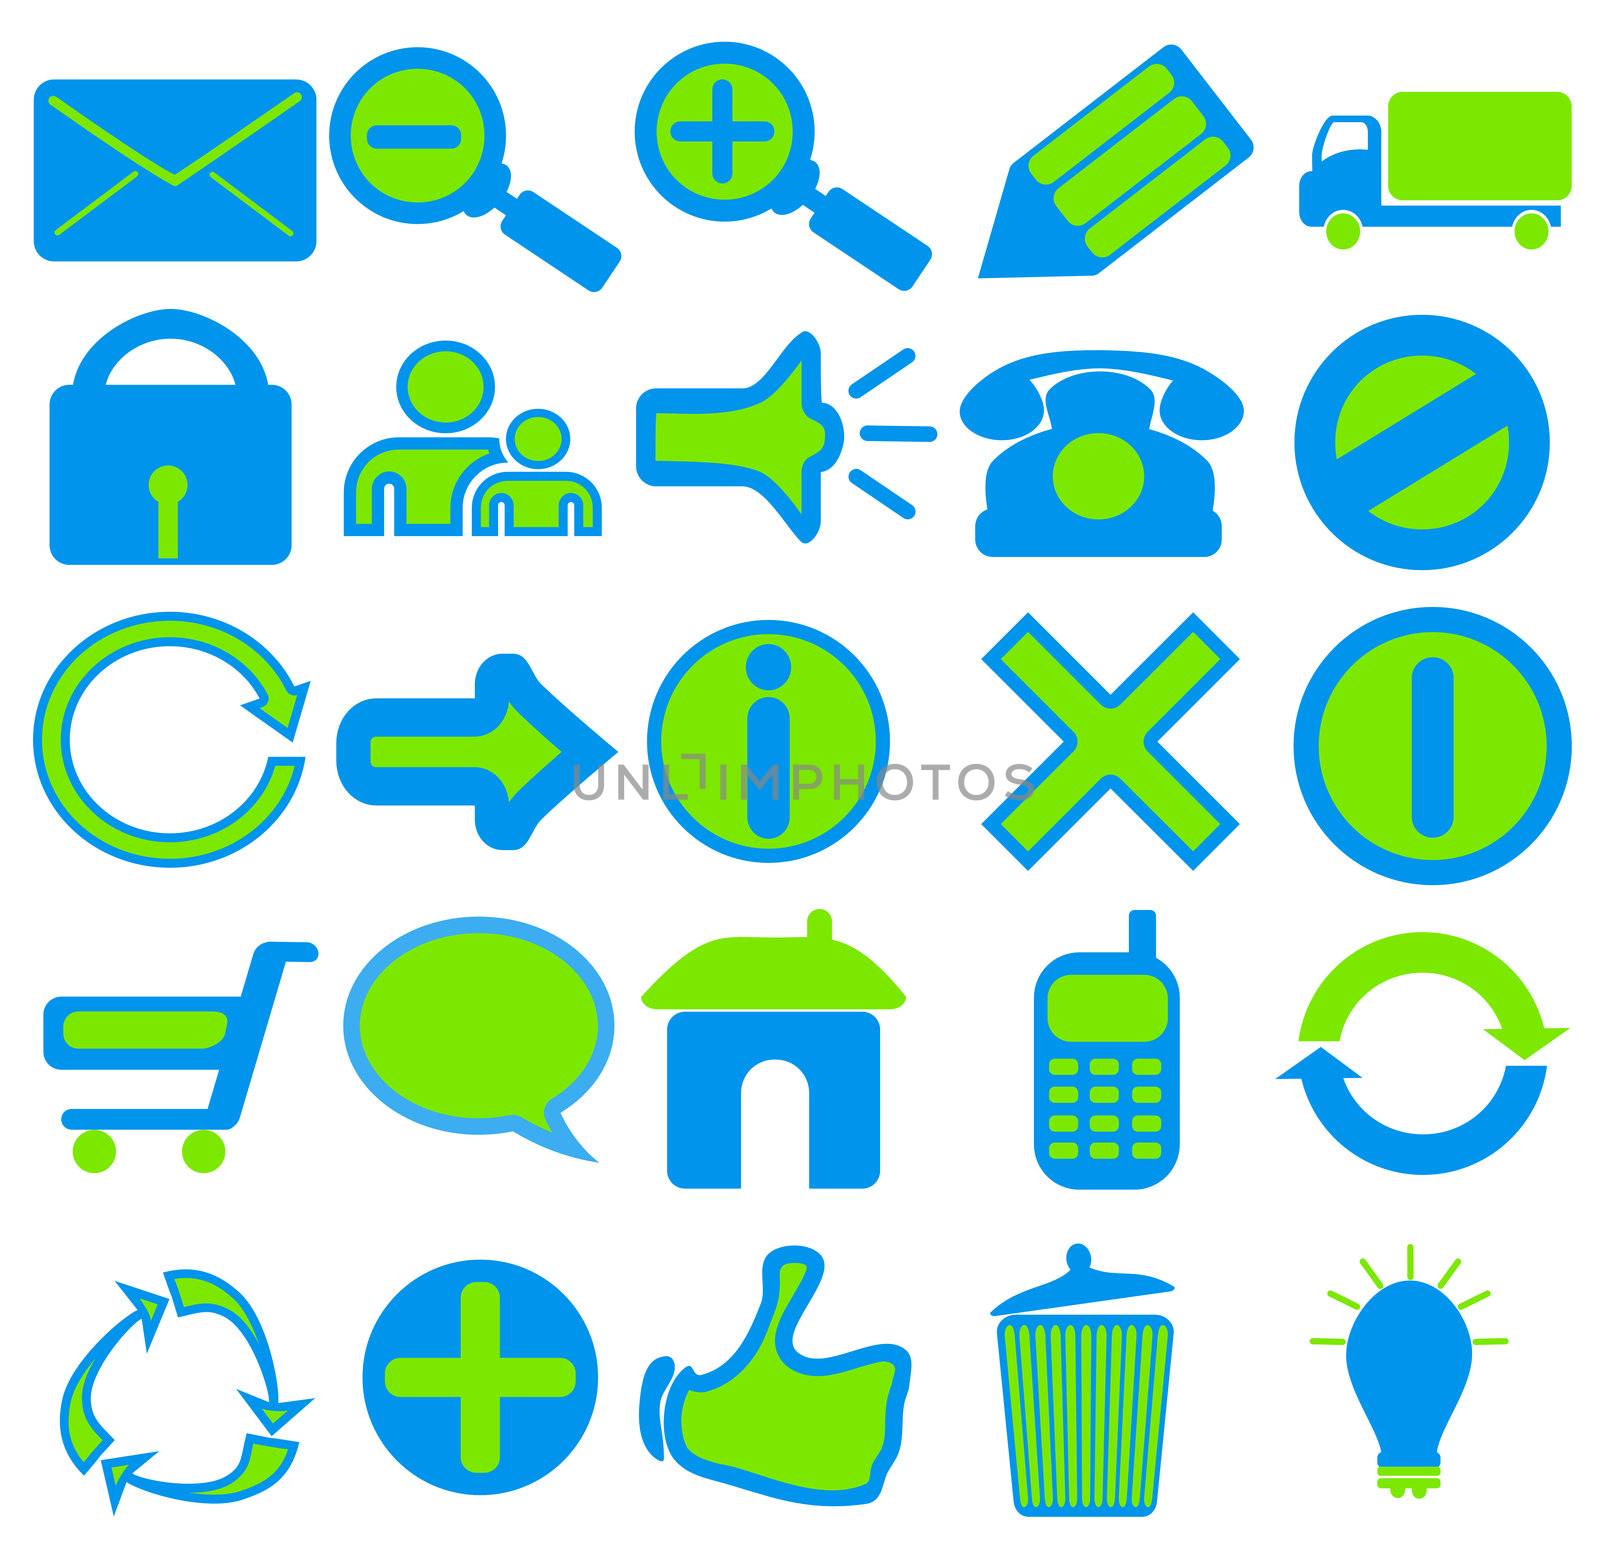 A collection of 25 web icons in blue and green colors